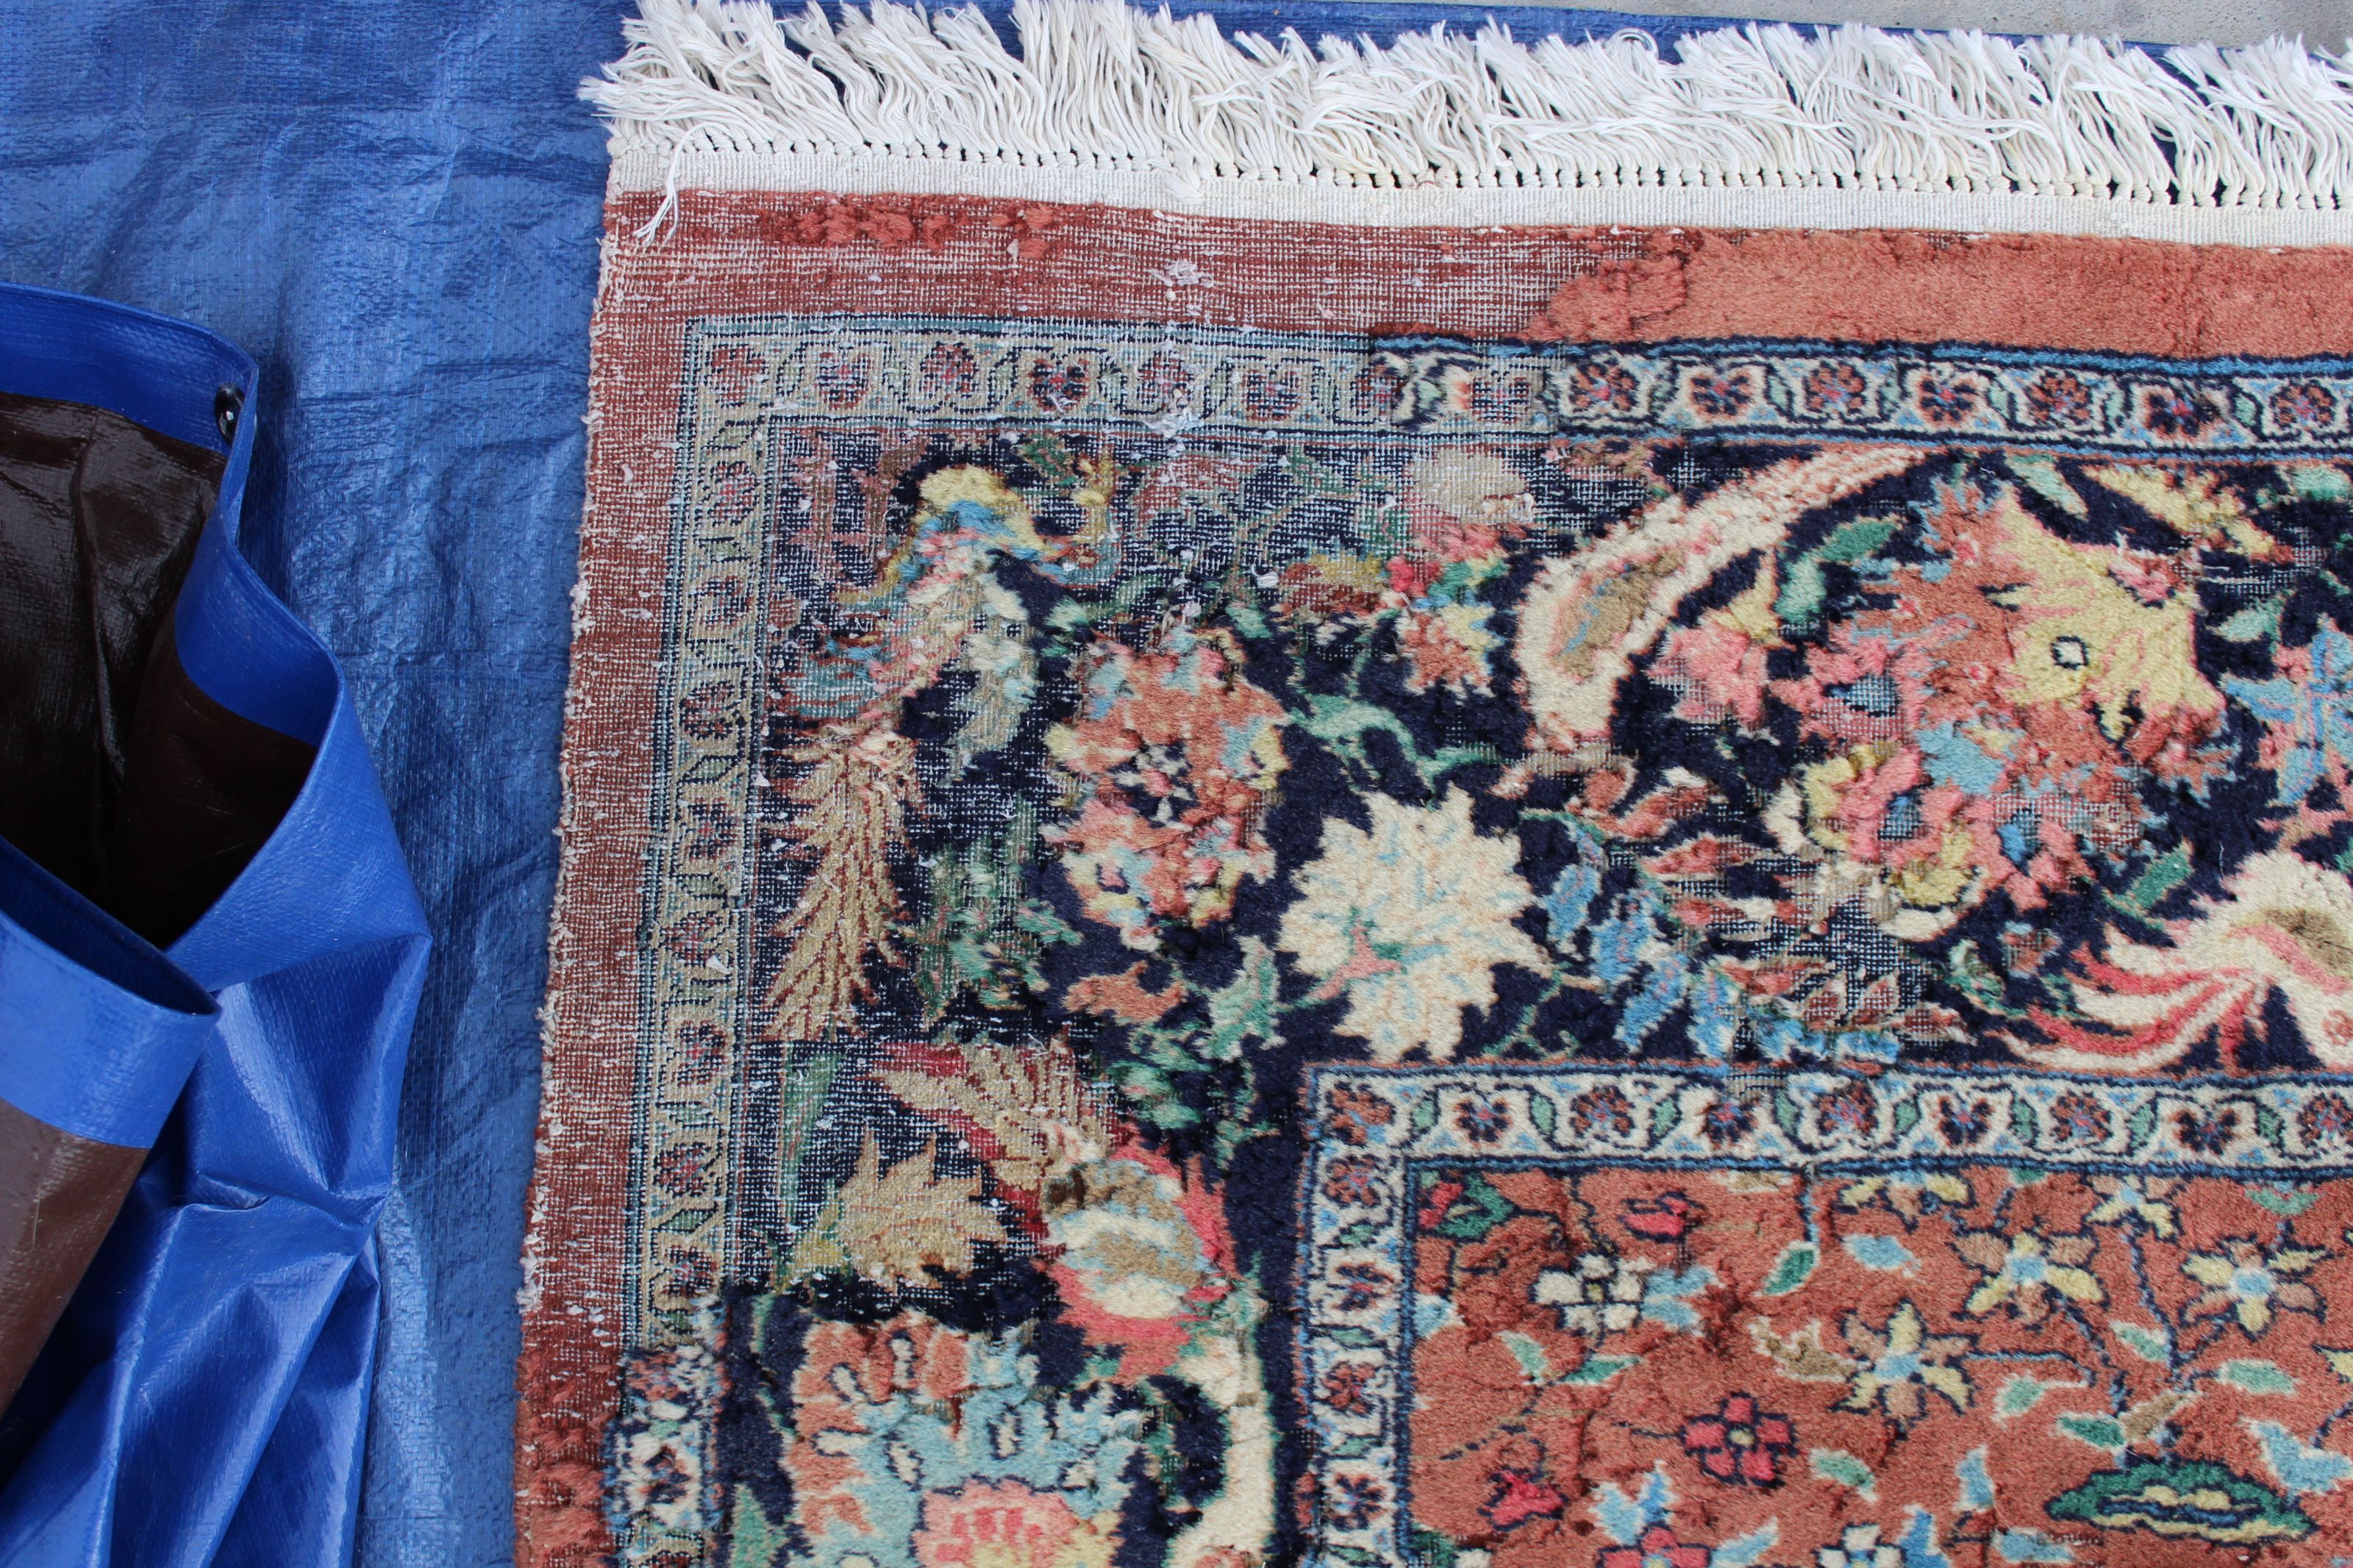 Prescott Valley Rug Cleaning Experts